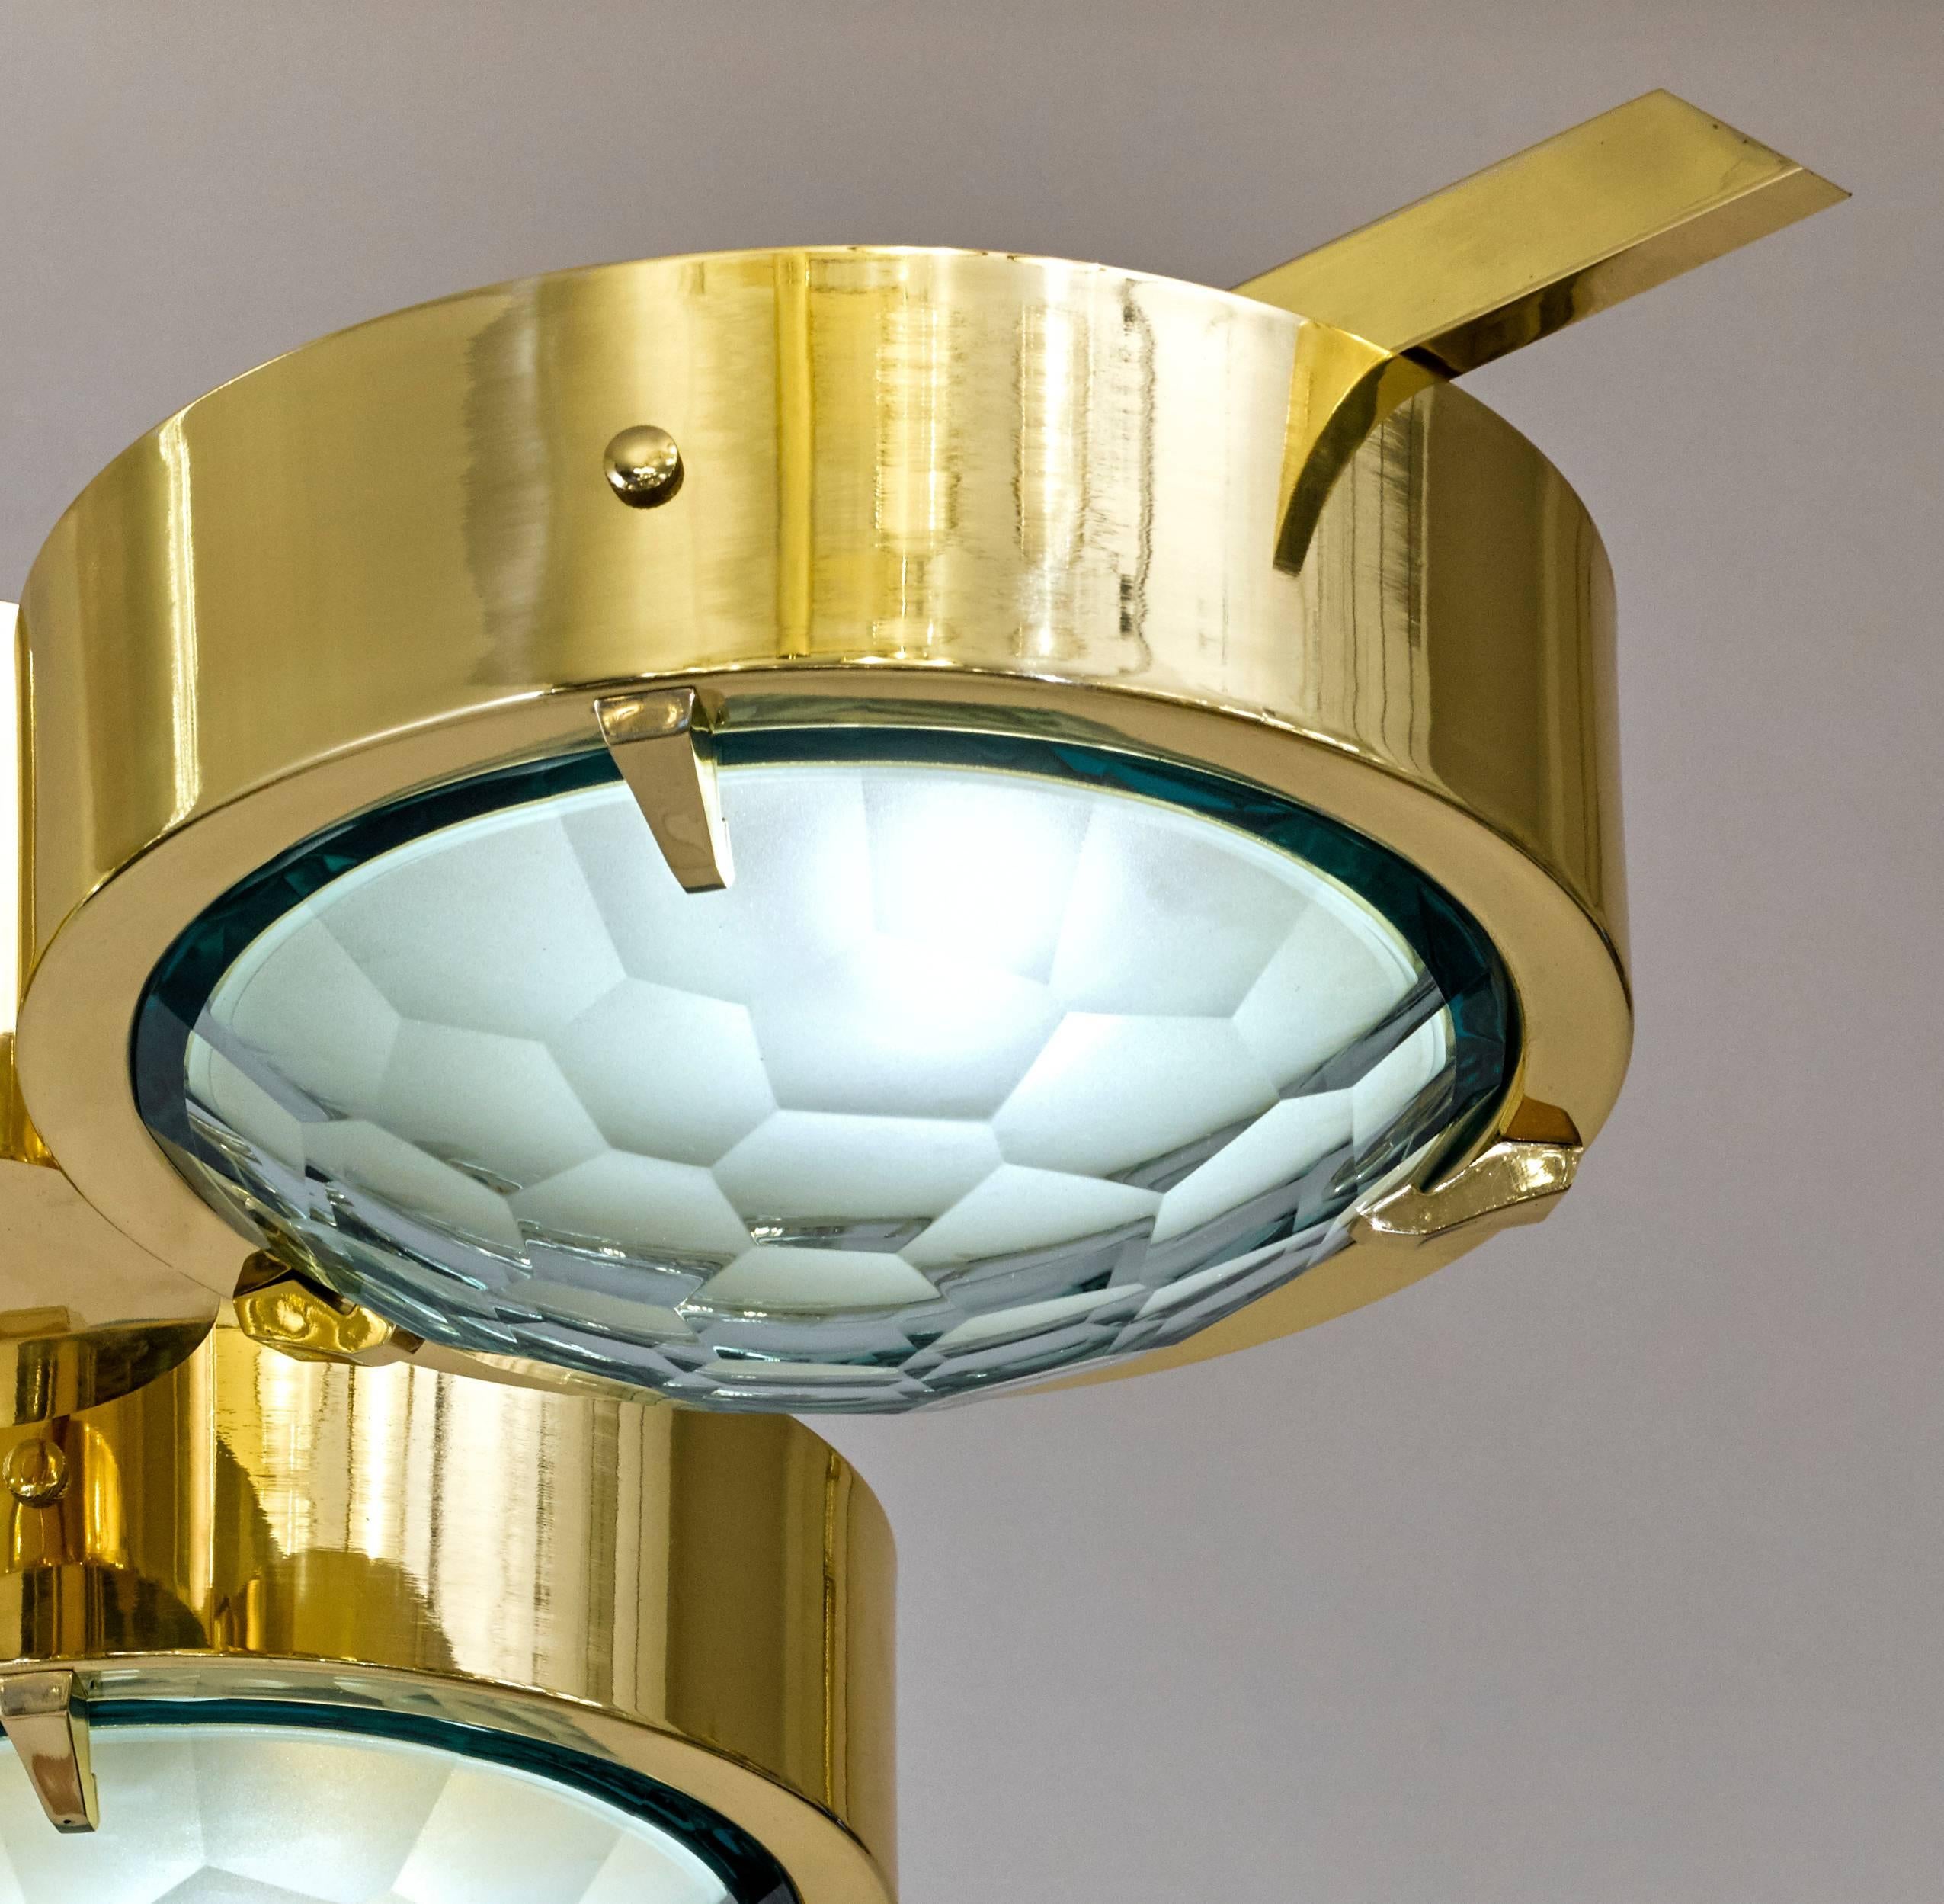 Stunning flush mount chandelier designed by Italian Artist Fedele Papagni for formA by Gaspare Asaro. It features three disks with green faceted glass bottoms on a brass frame. The glass is frosted on the inside providing a soft diffused light. Can